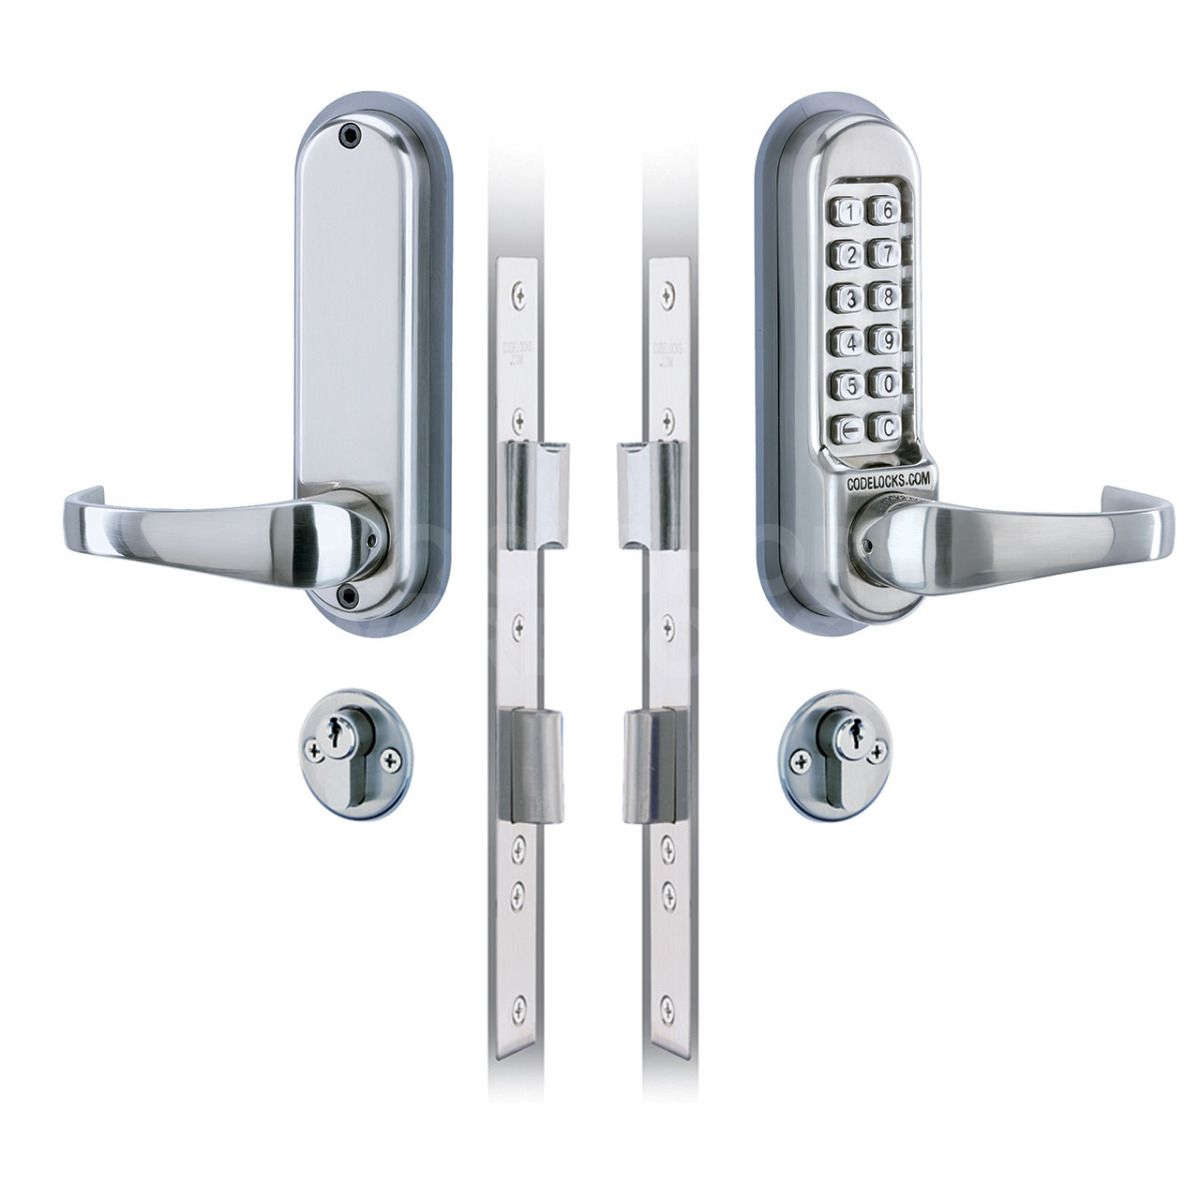 Codelocks 520/525 Mechanical Digital Lock includes full mortice lock and deadbolt, complete with euro cylinder and keys